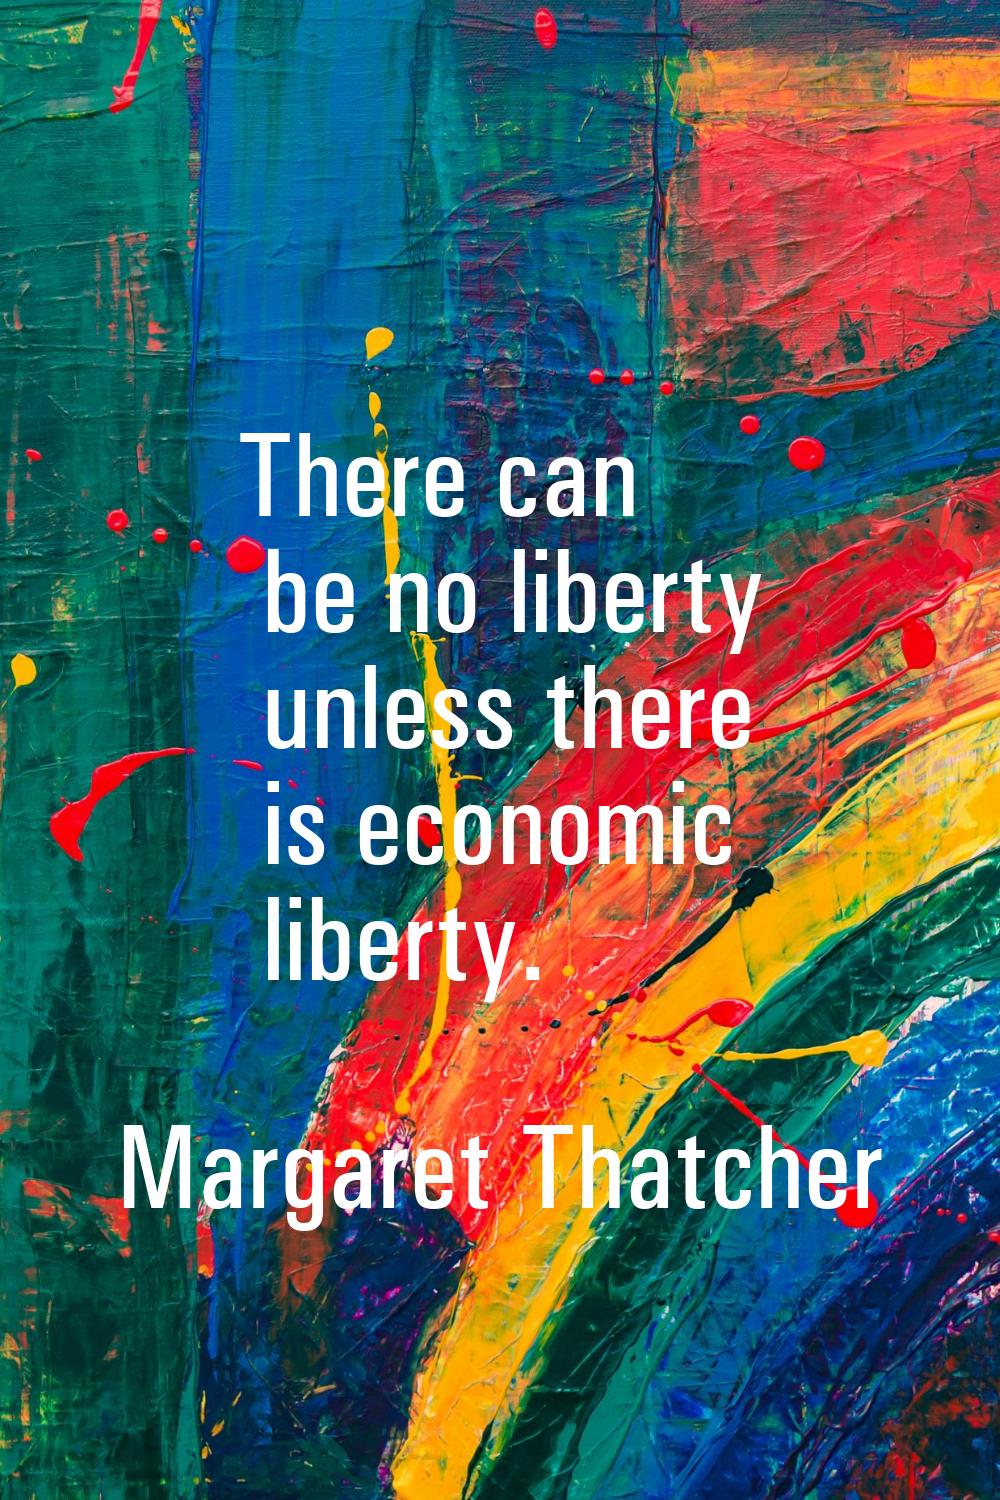 There can be no liberty unless there is economic liberty.